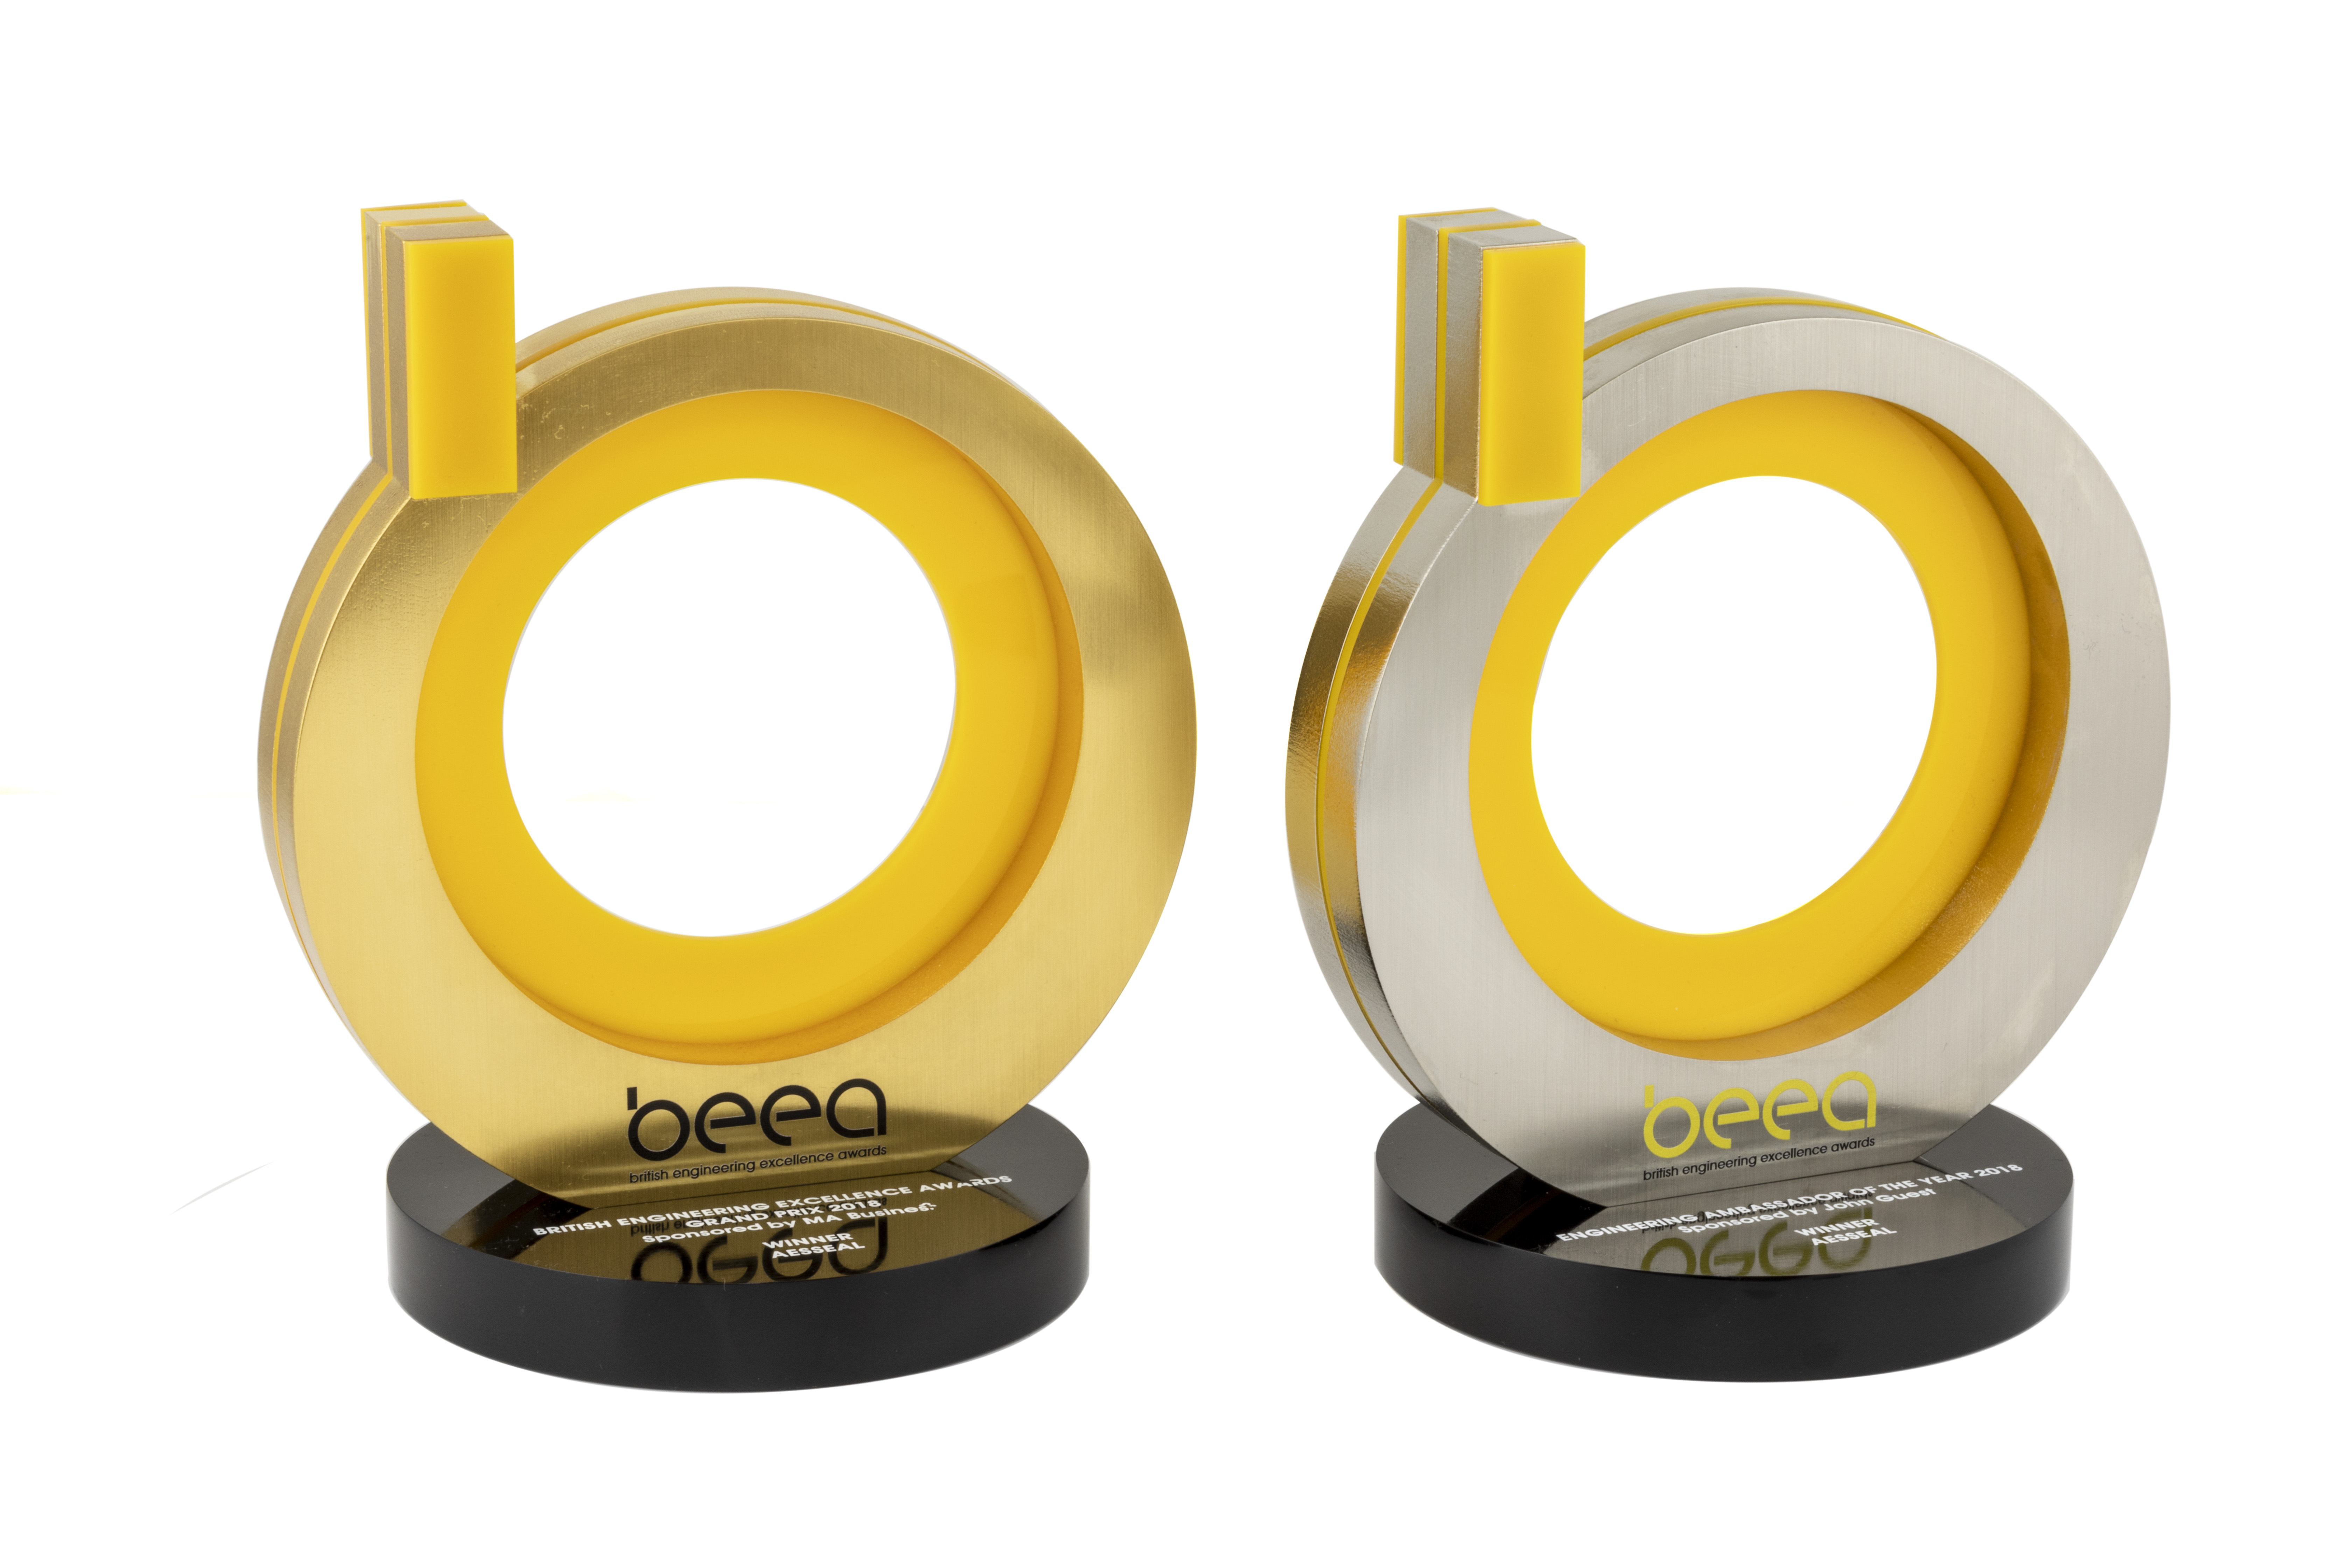 AESSEAL received both the BEEA Engineering Ambassador of the Year and the Grand Prix award.